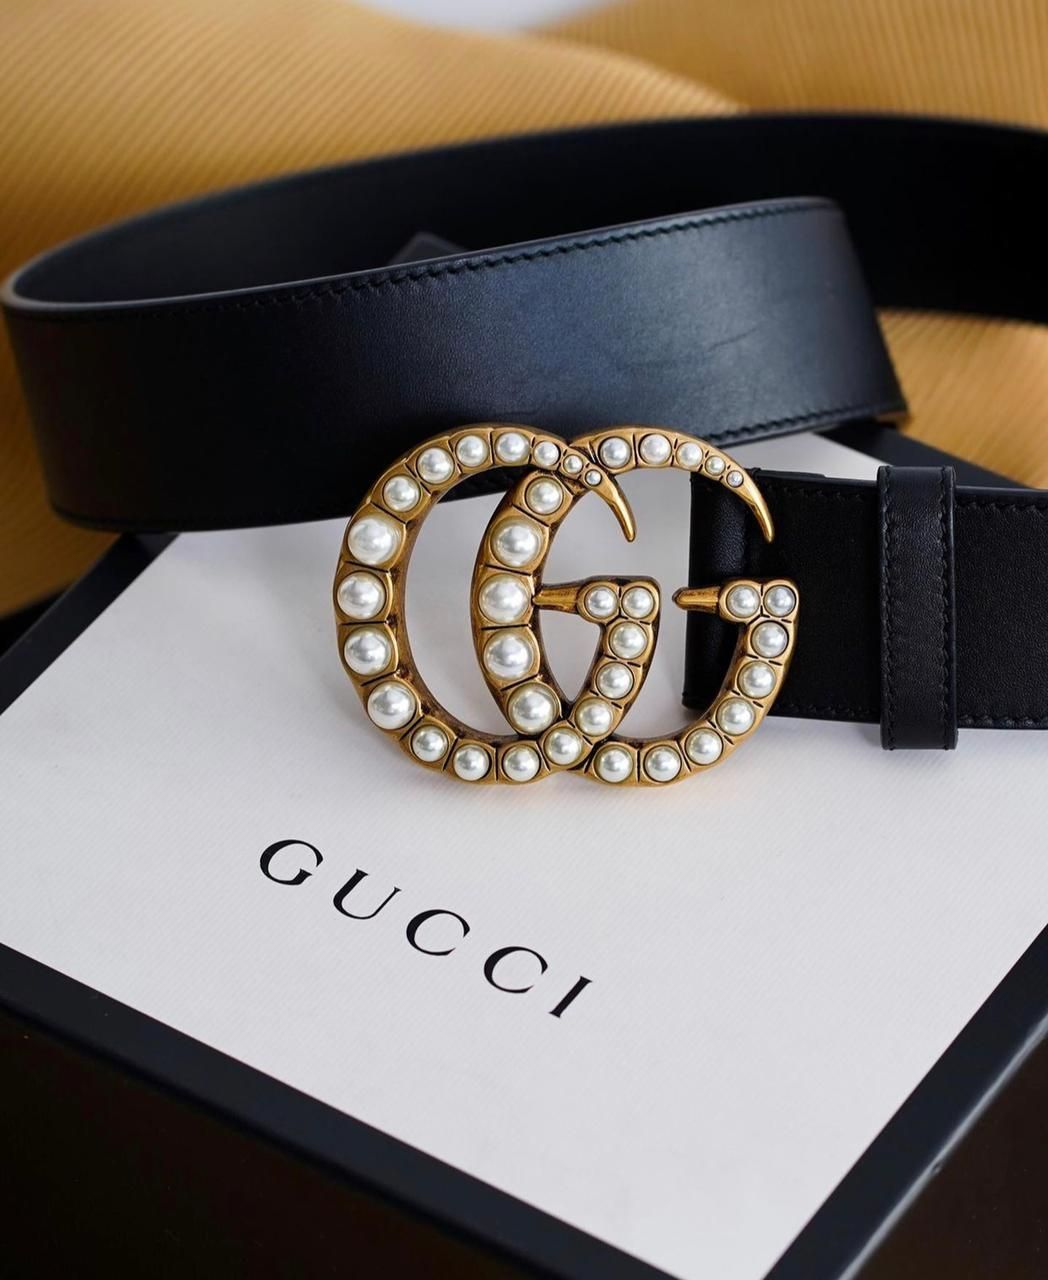 Luxury Brand: Gucci banks on private 'salons' for the ultra-rich